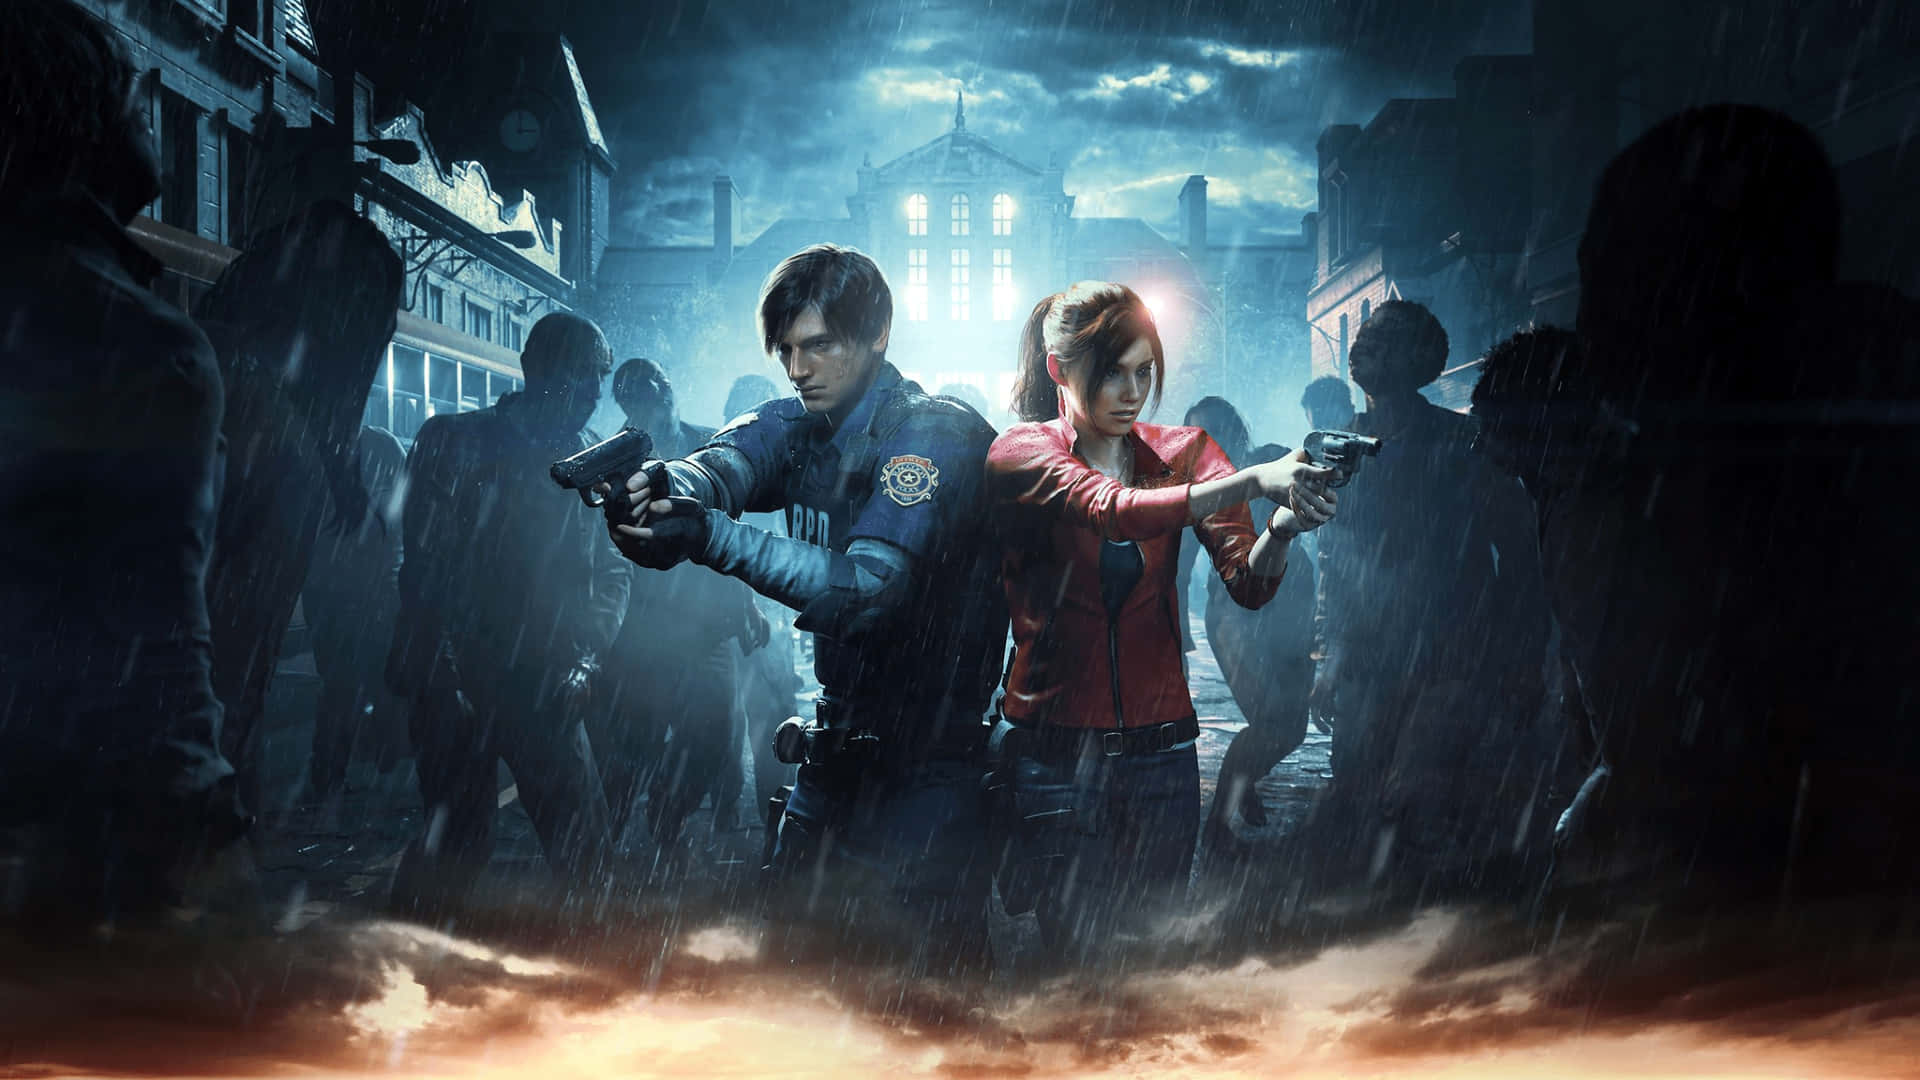 "Explore the terrifying world of Raccoon City in 'Resident Evil 2'!"